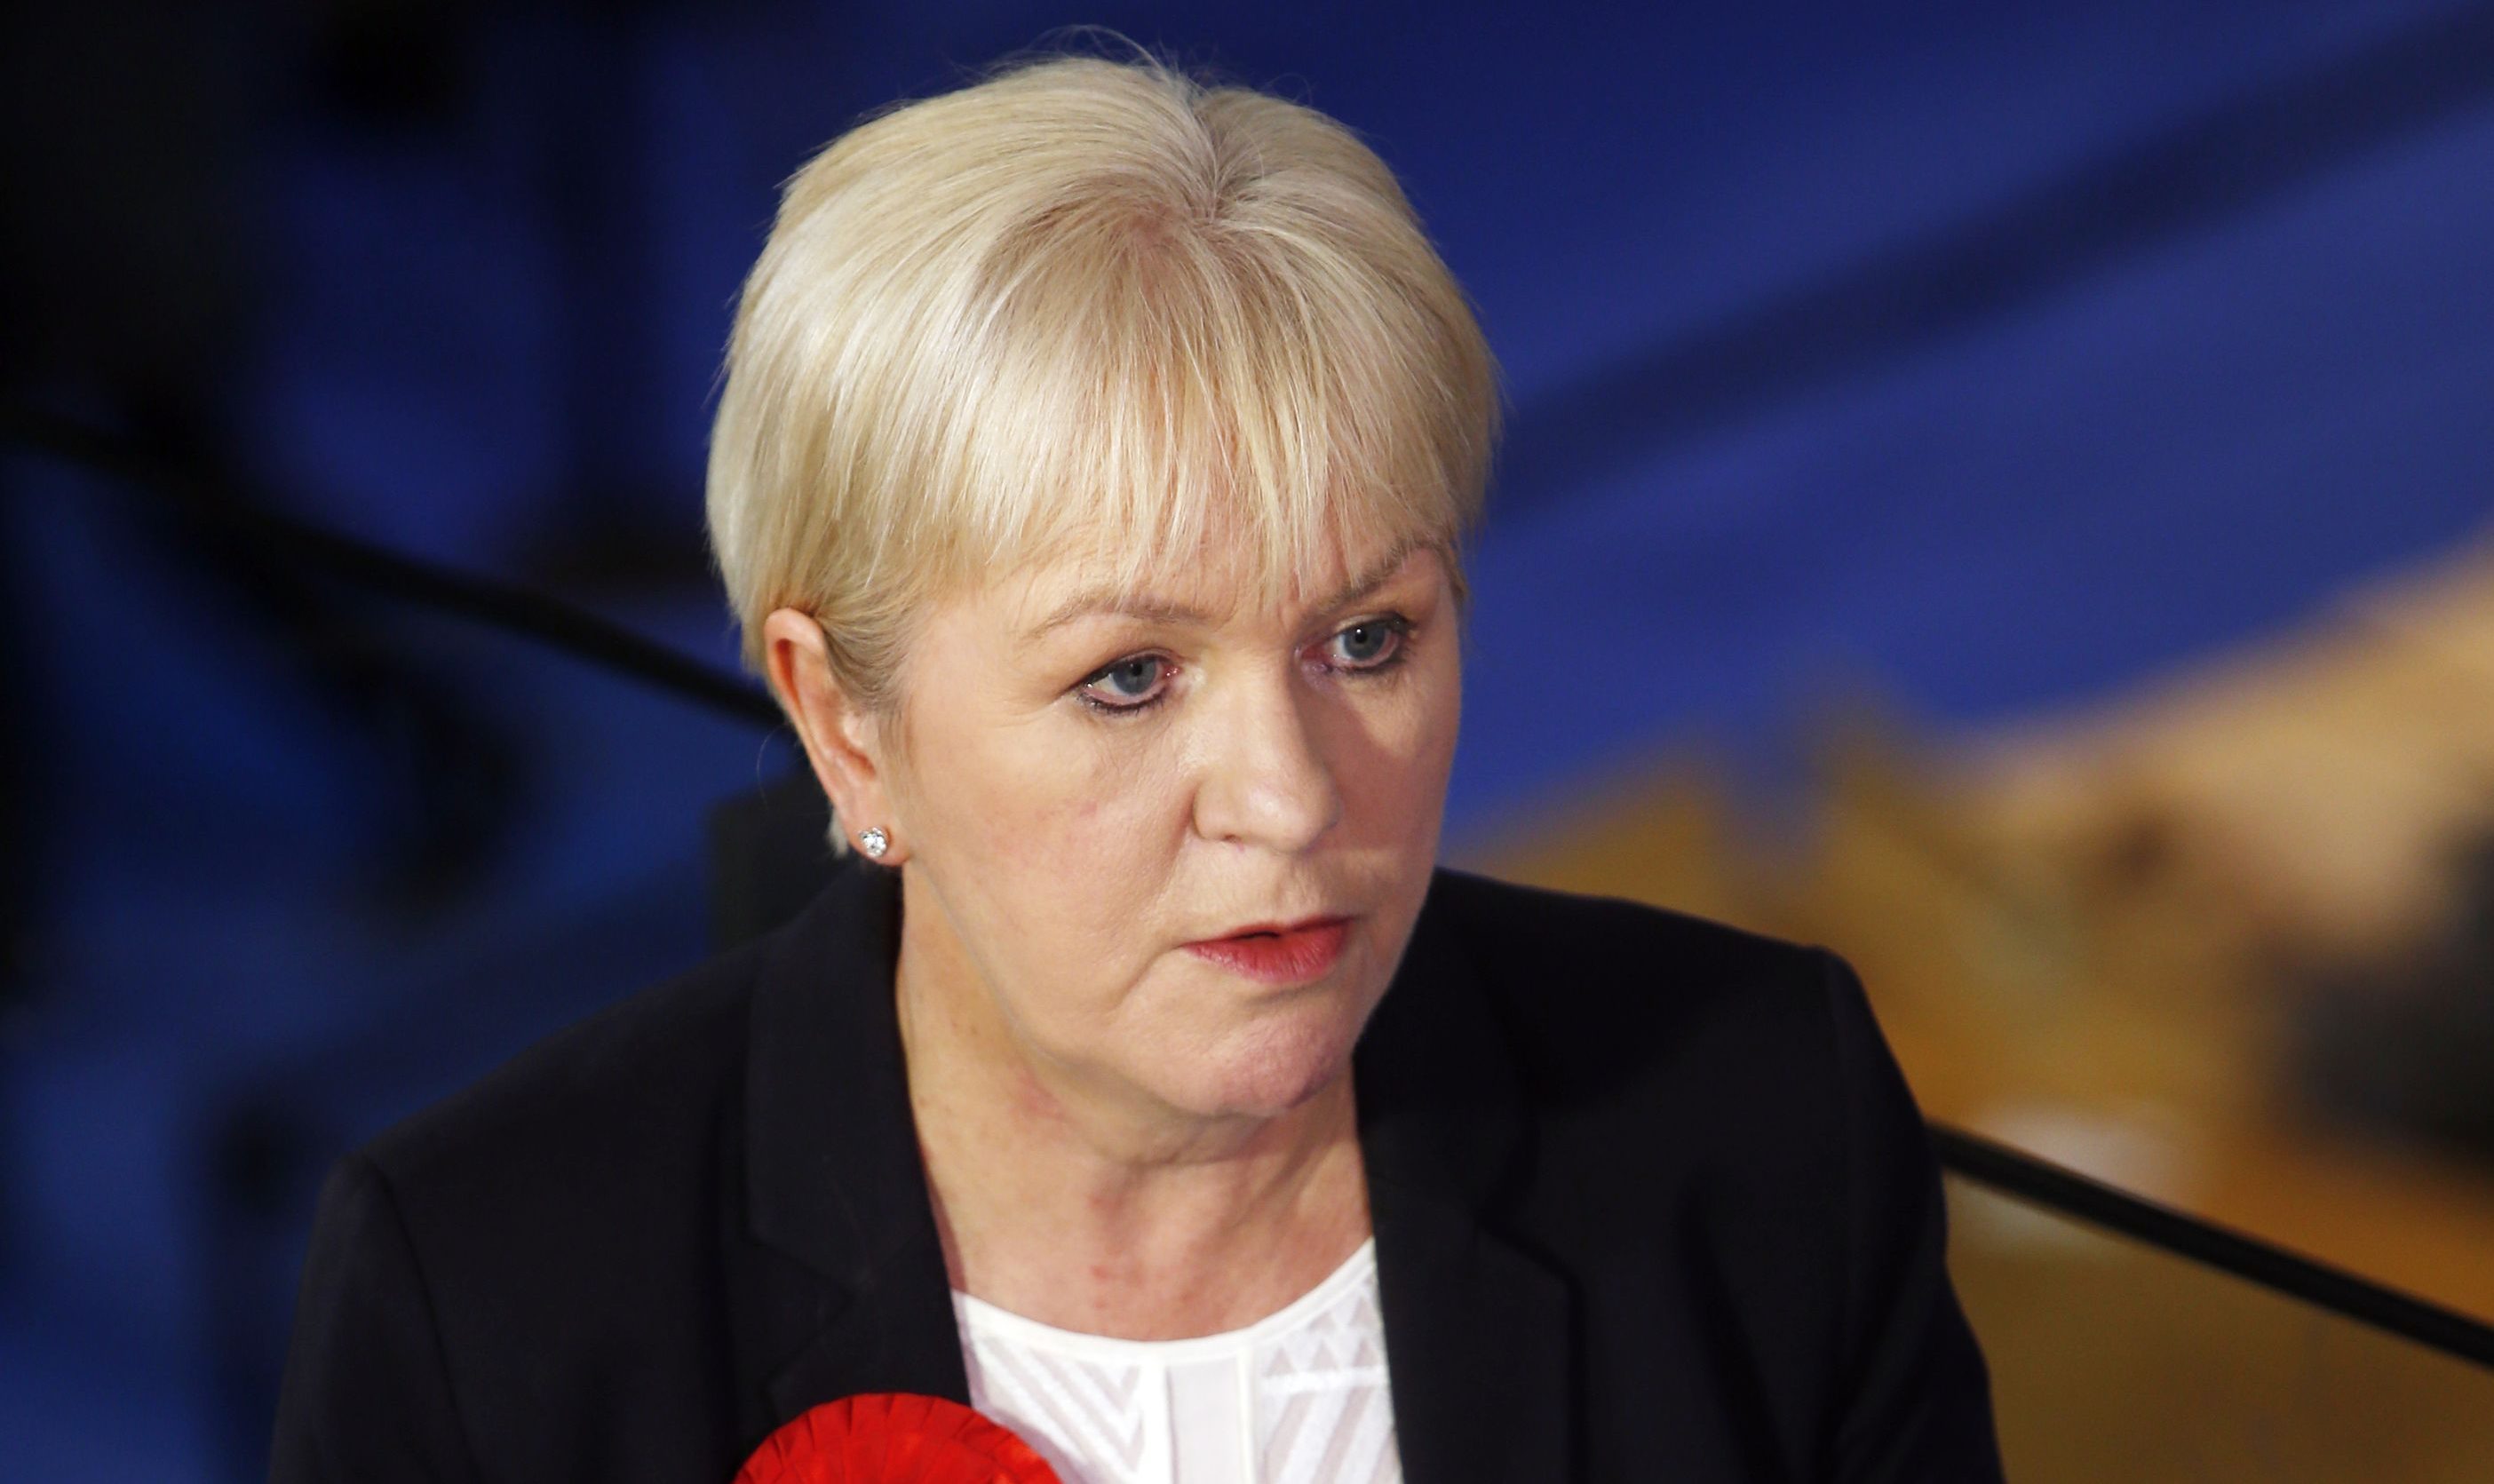 Johann Lamont lost her constituency seat but gets back to Holyrood in on the list count.